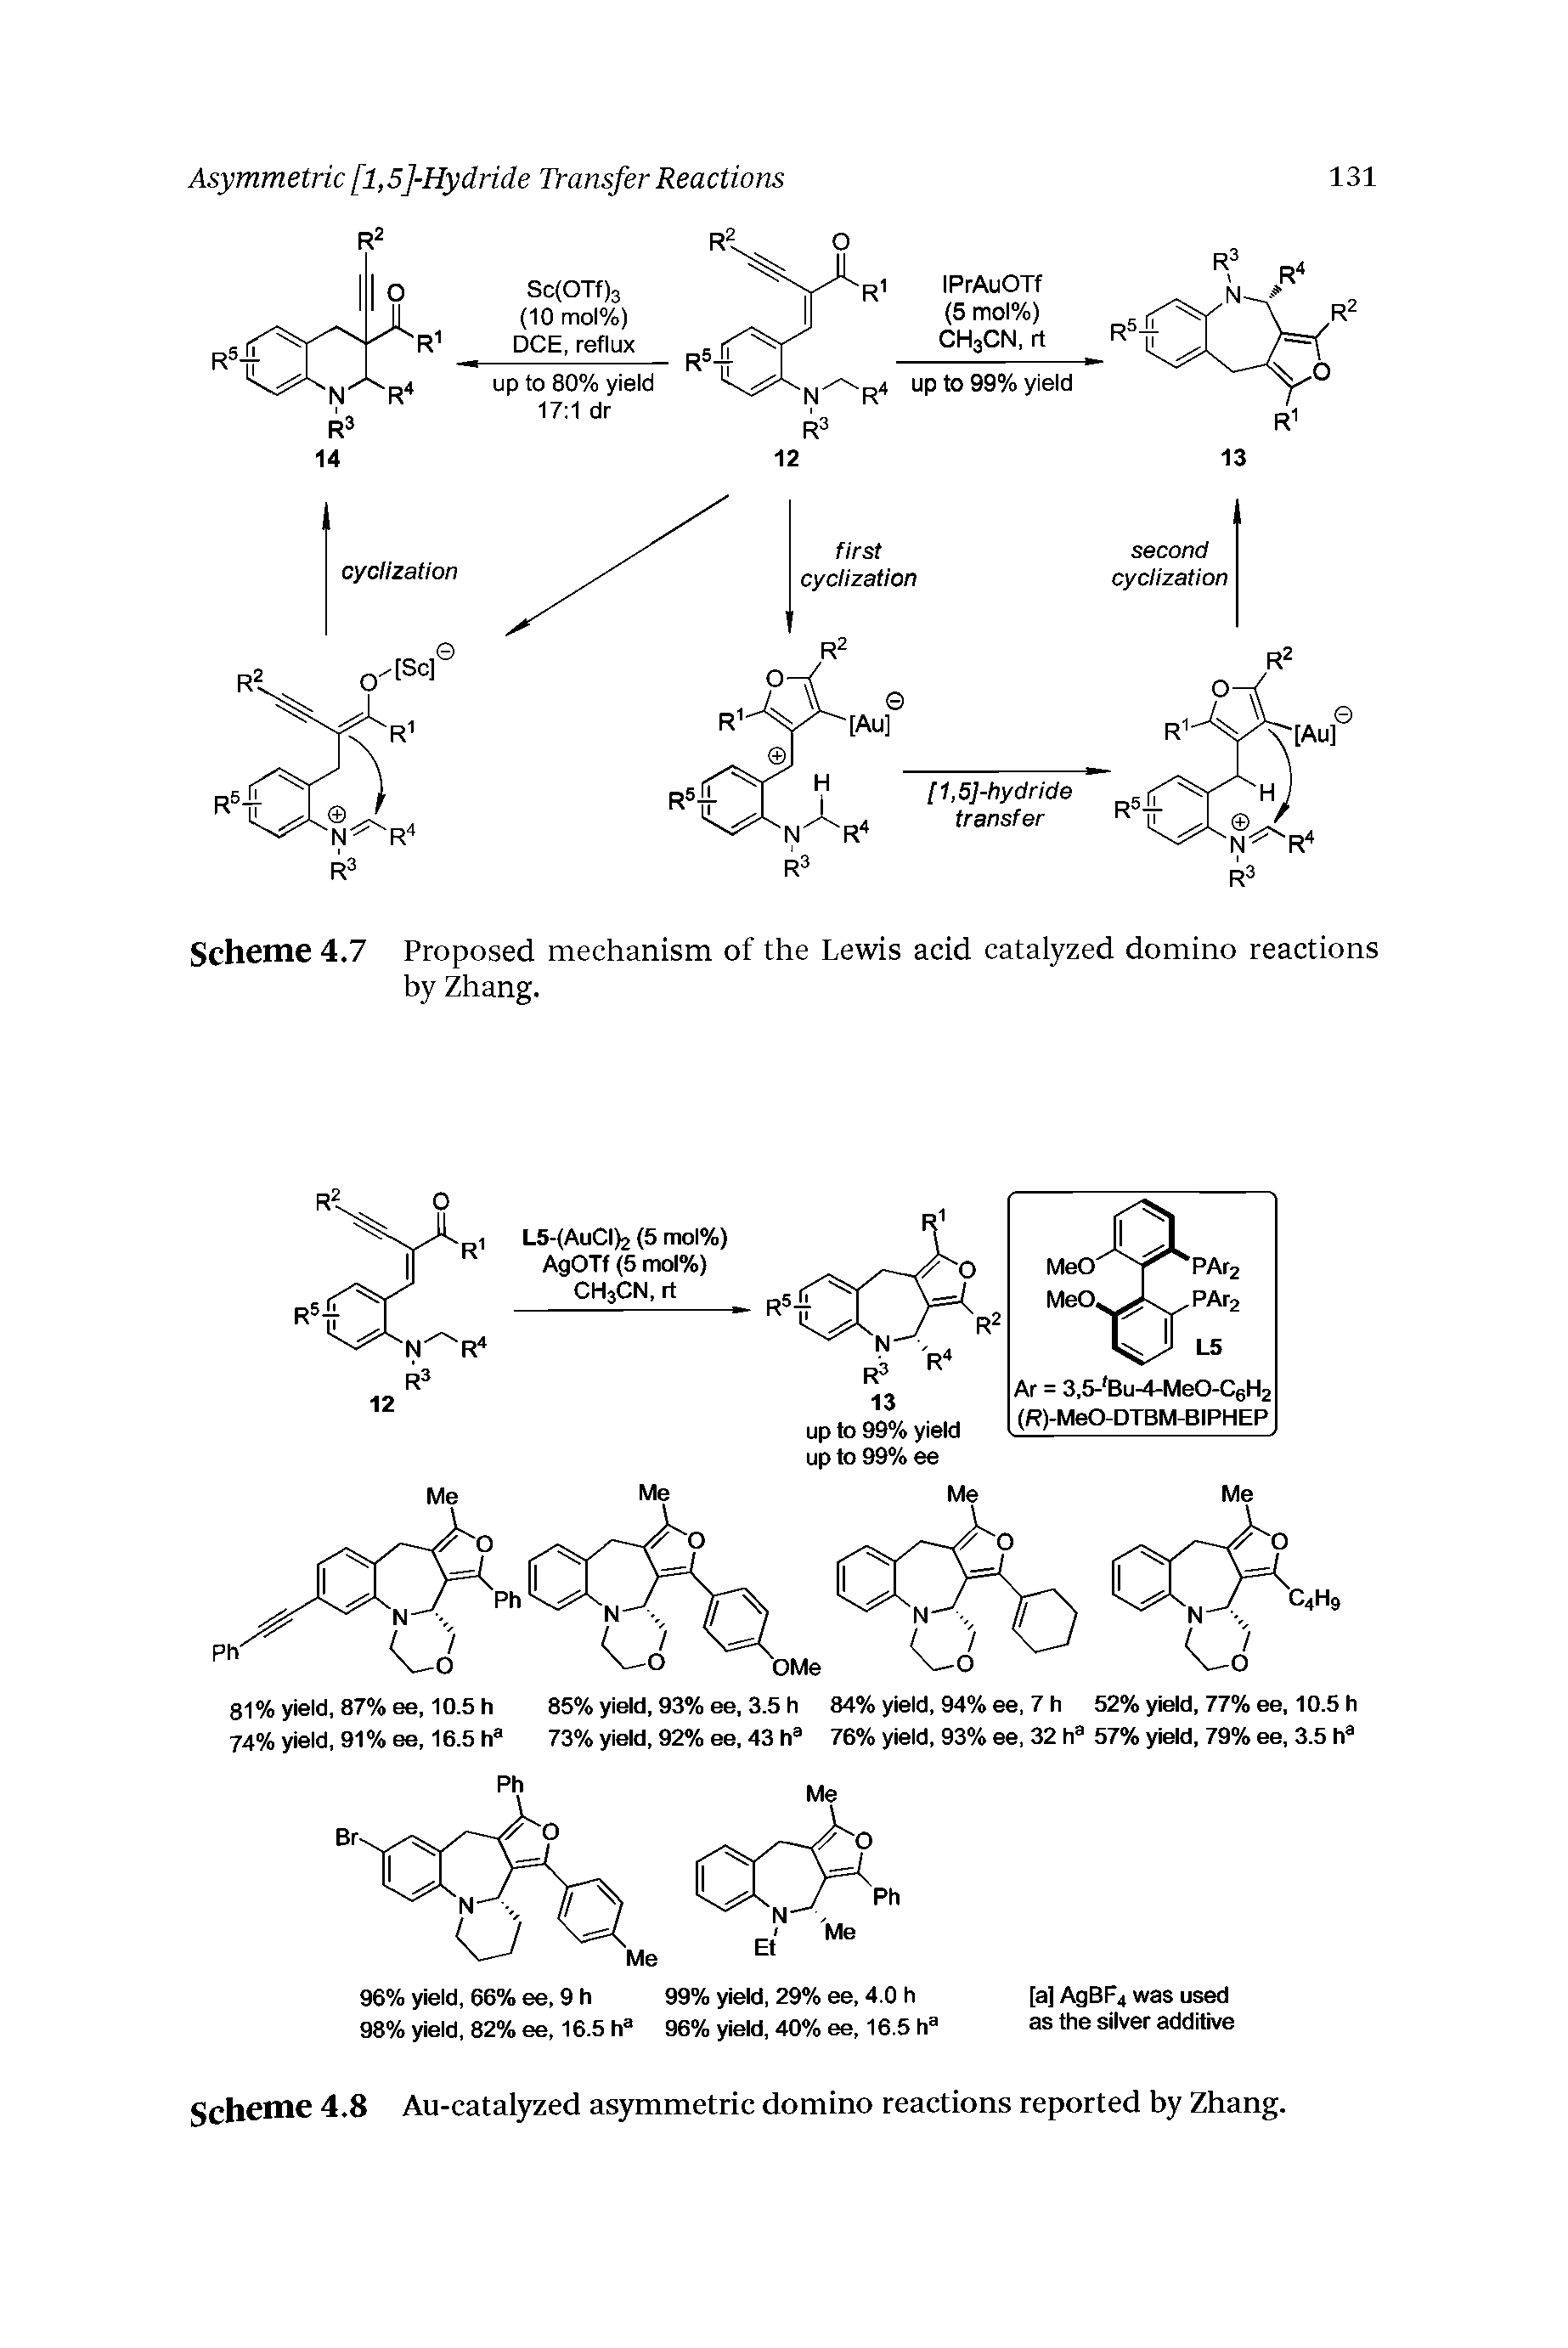 Scheme 4.8 Au-catalyzed asymmetric domino reactions reported by Zhang.